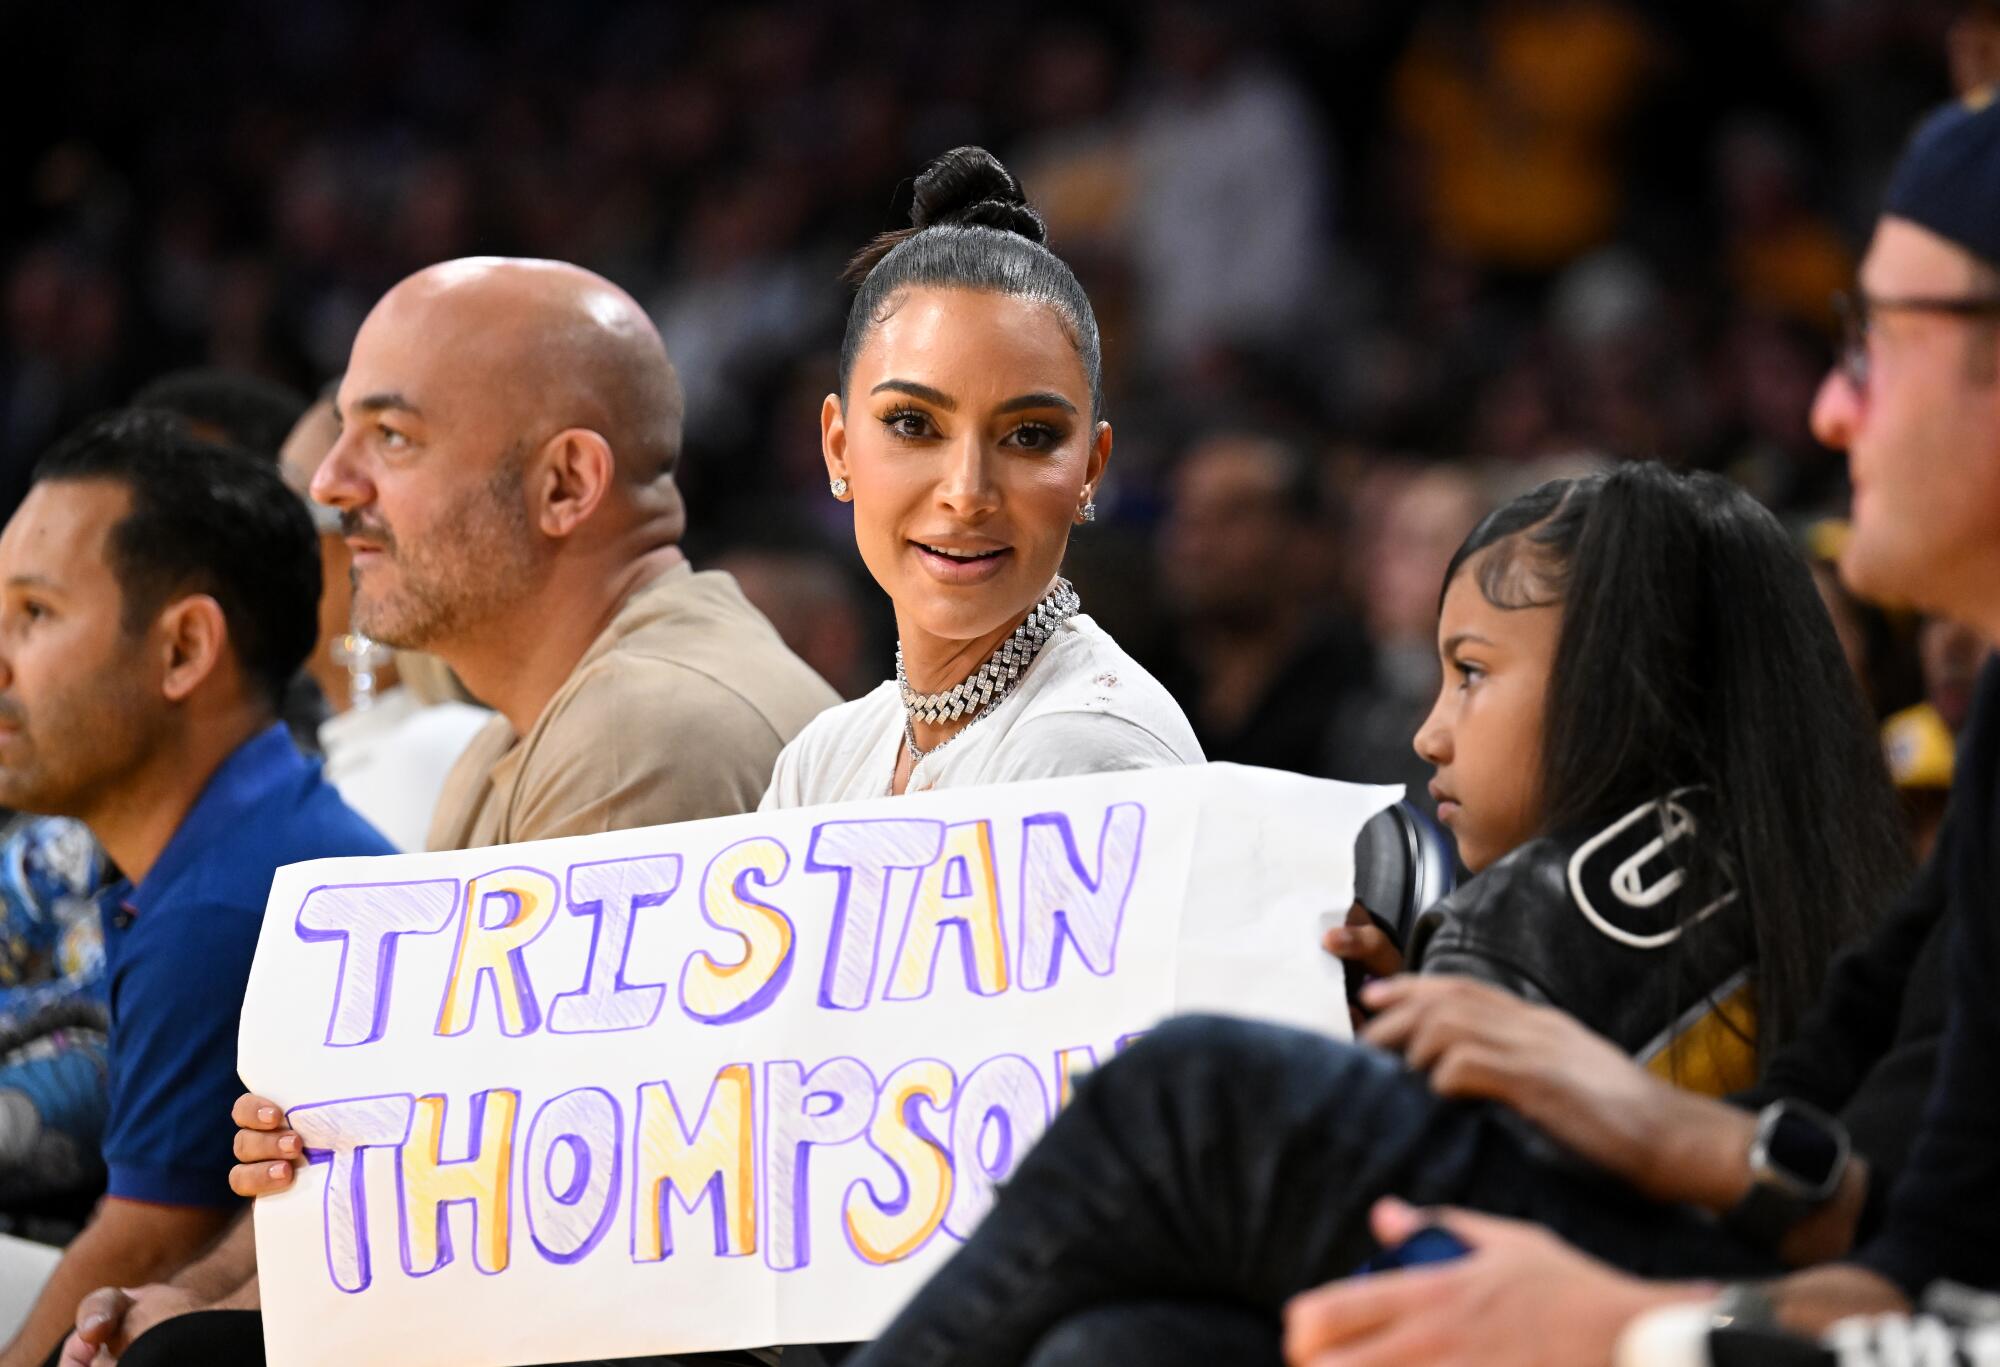 Kim Kardashian attends a playoff game with daughter North West at Crypto.com Arena.